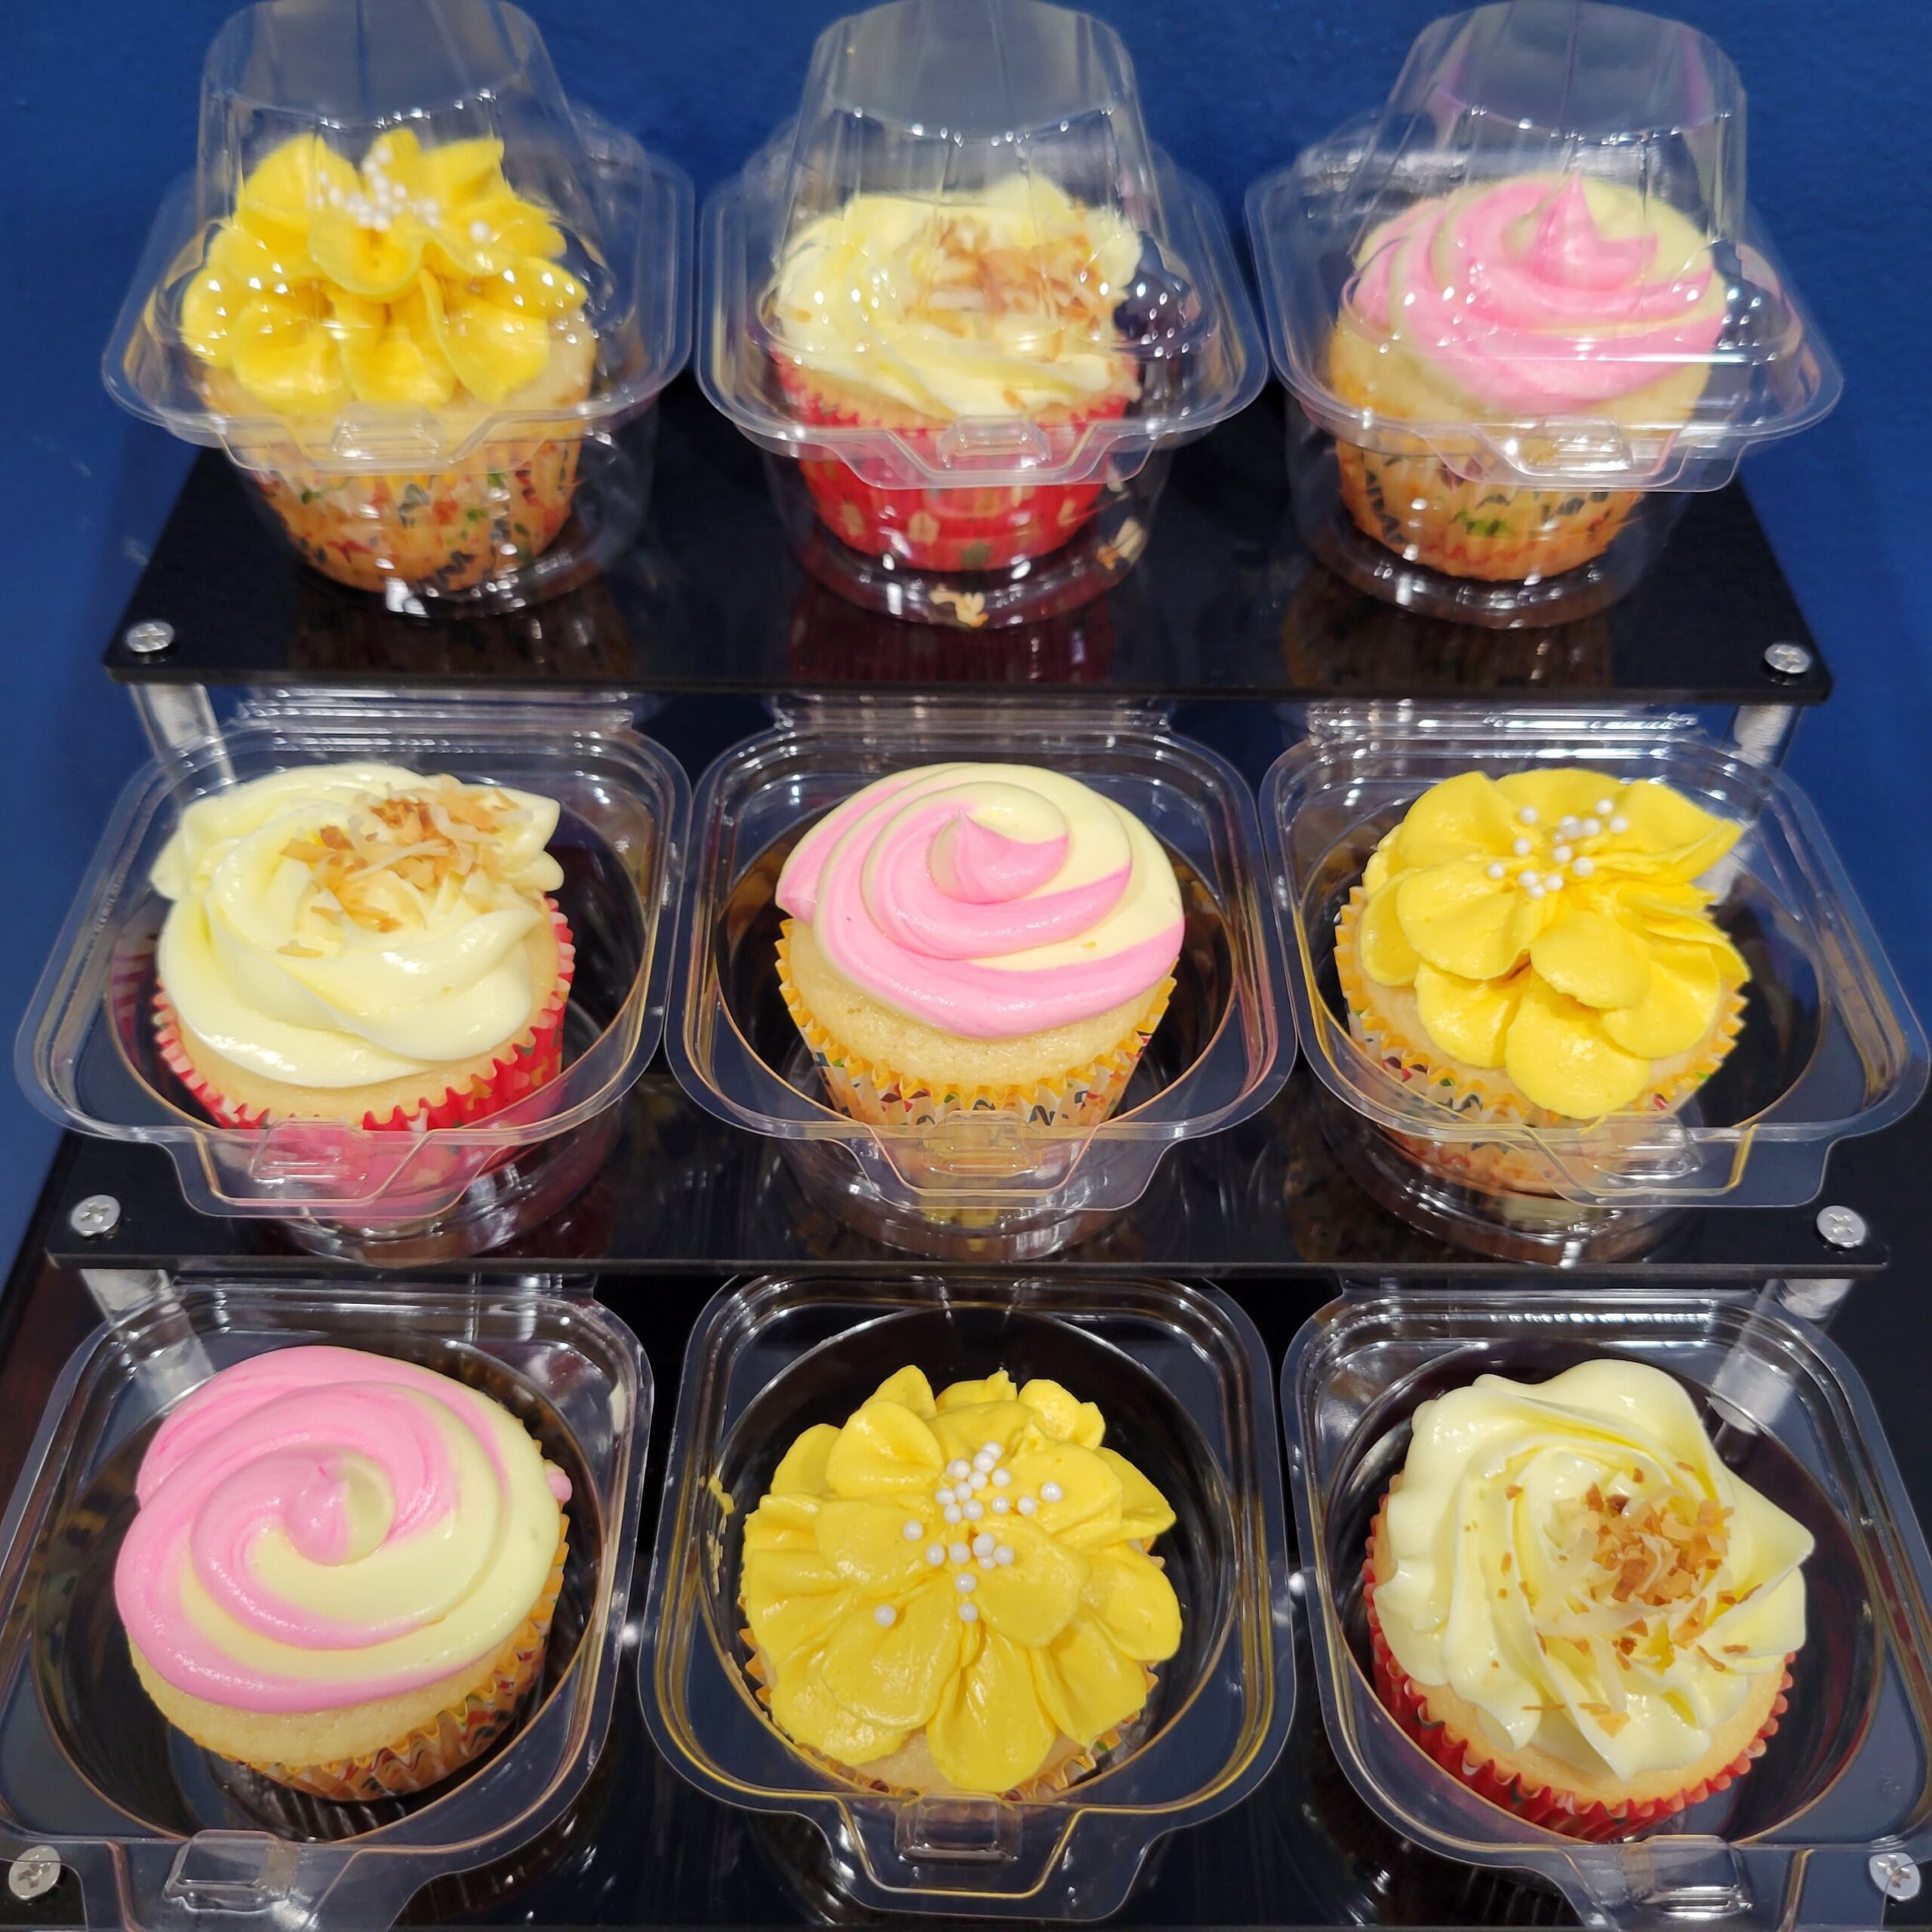 Cupcake Carnival: Assorted Flavors Delight (15 cupcakes)